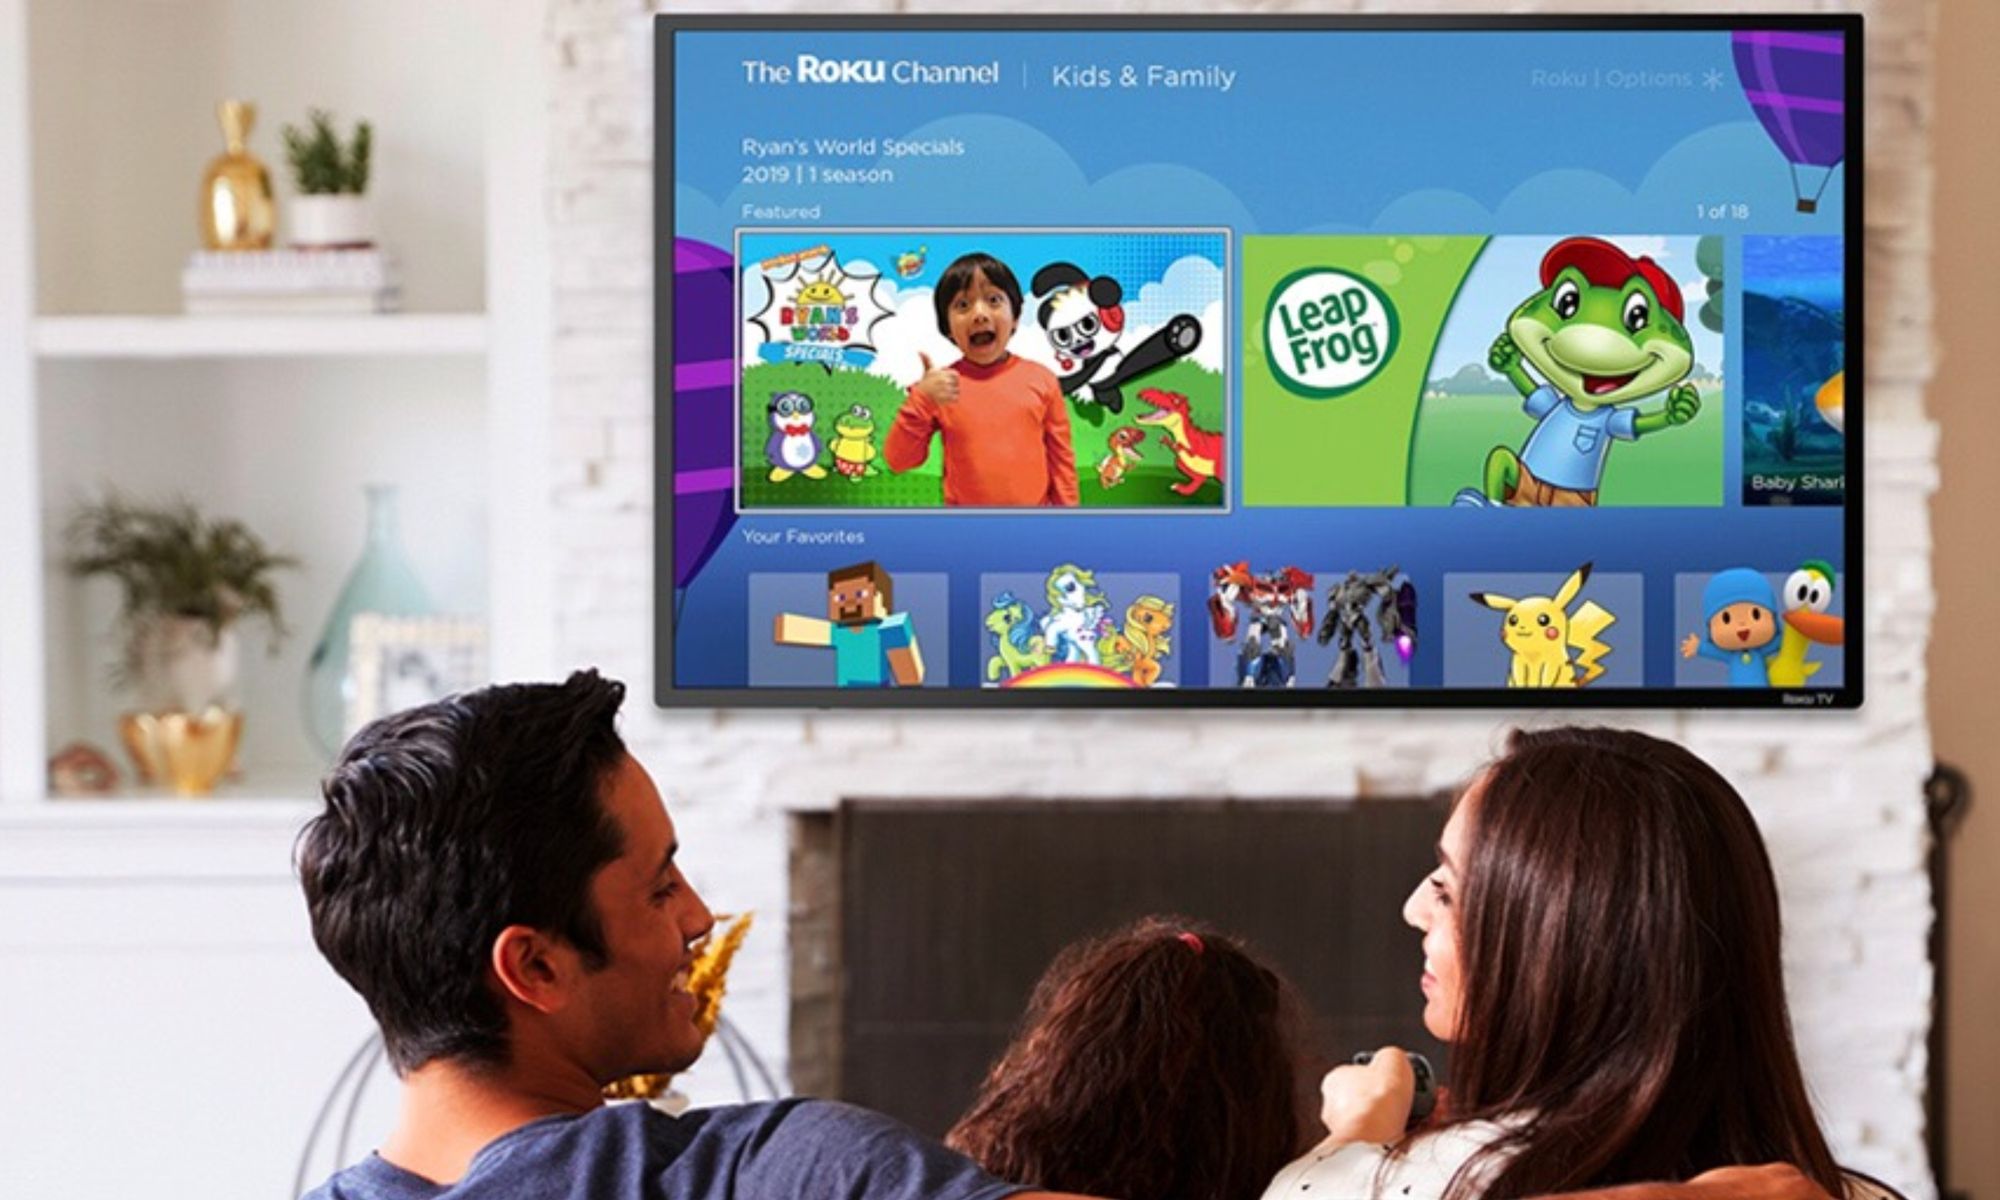 Roku rolls out parental control features and launches “Kids & Family” on The Roku Channel